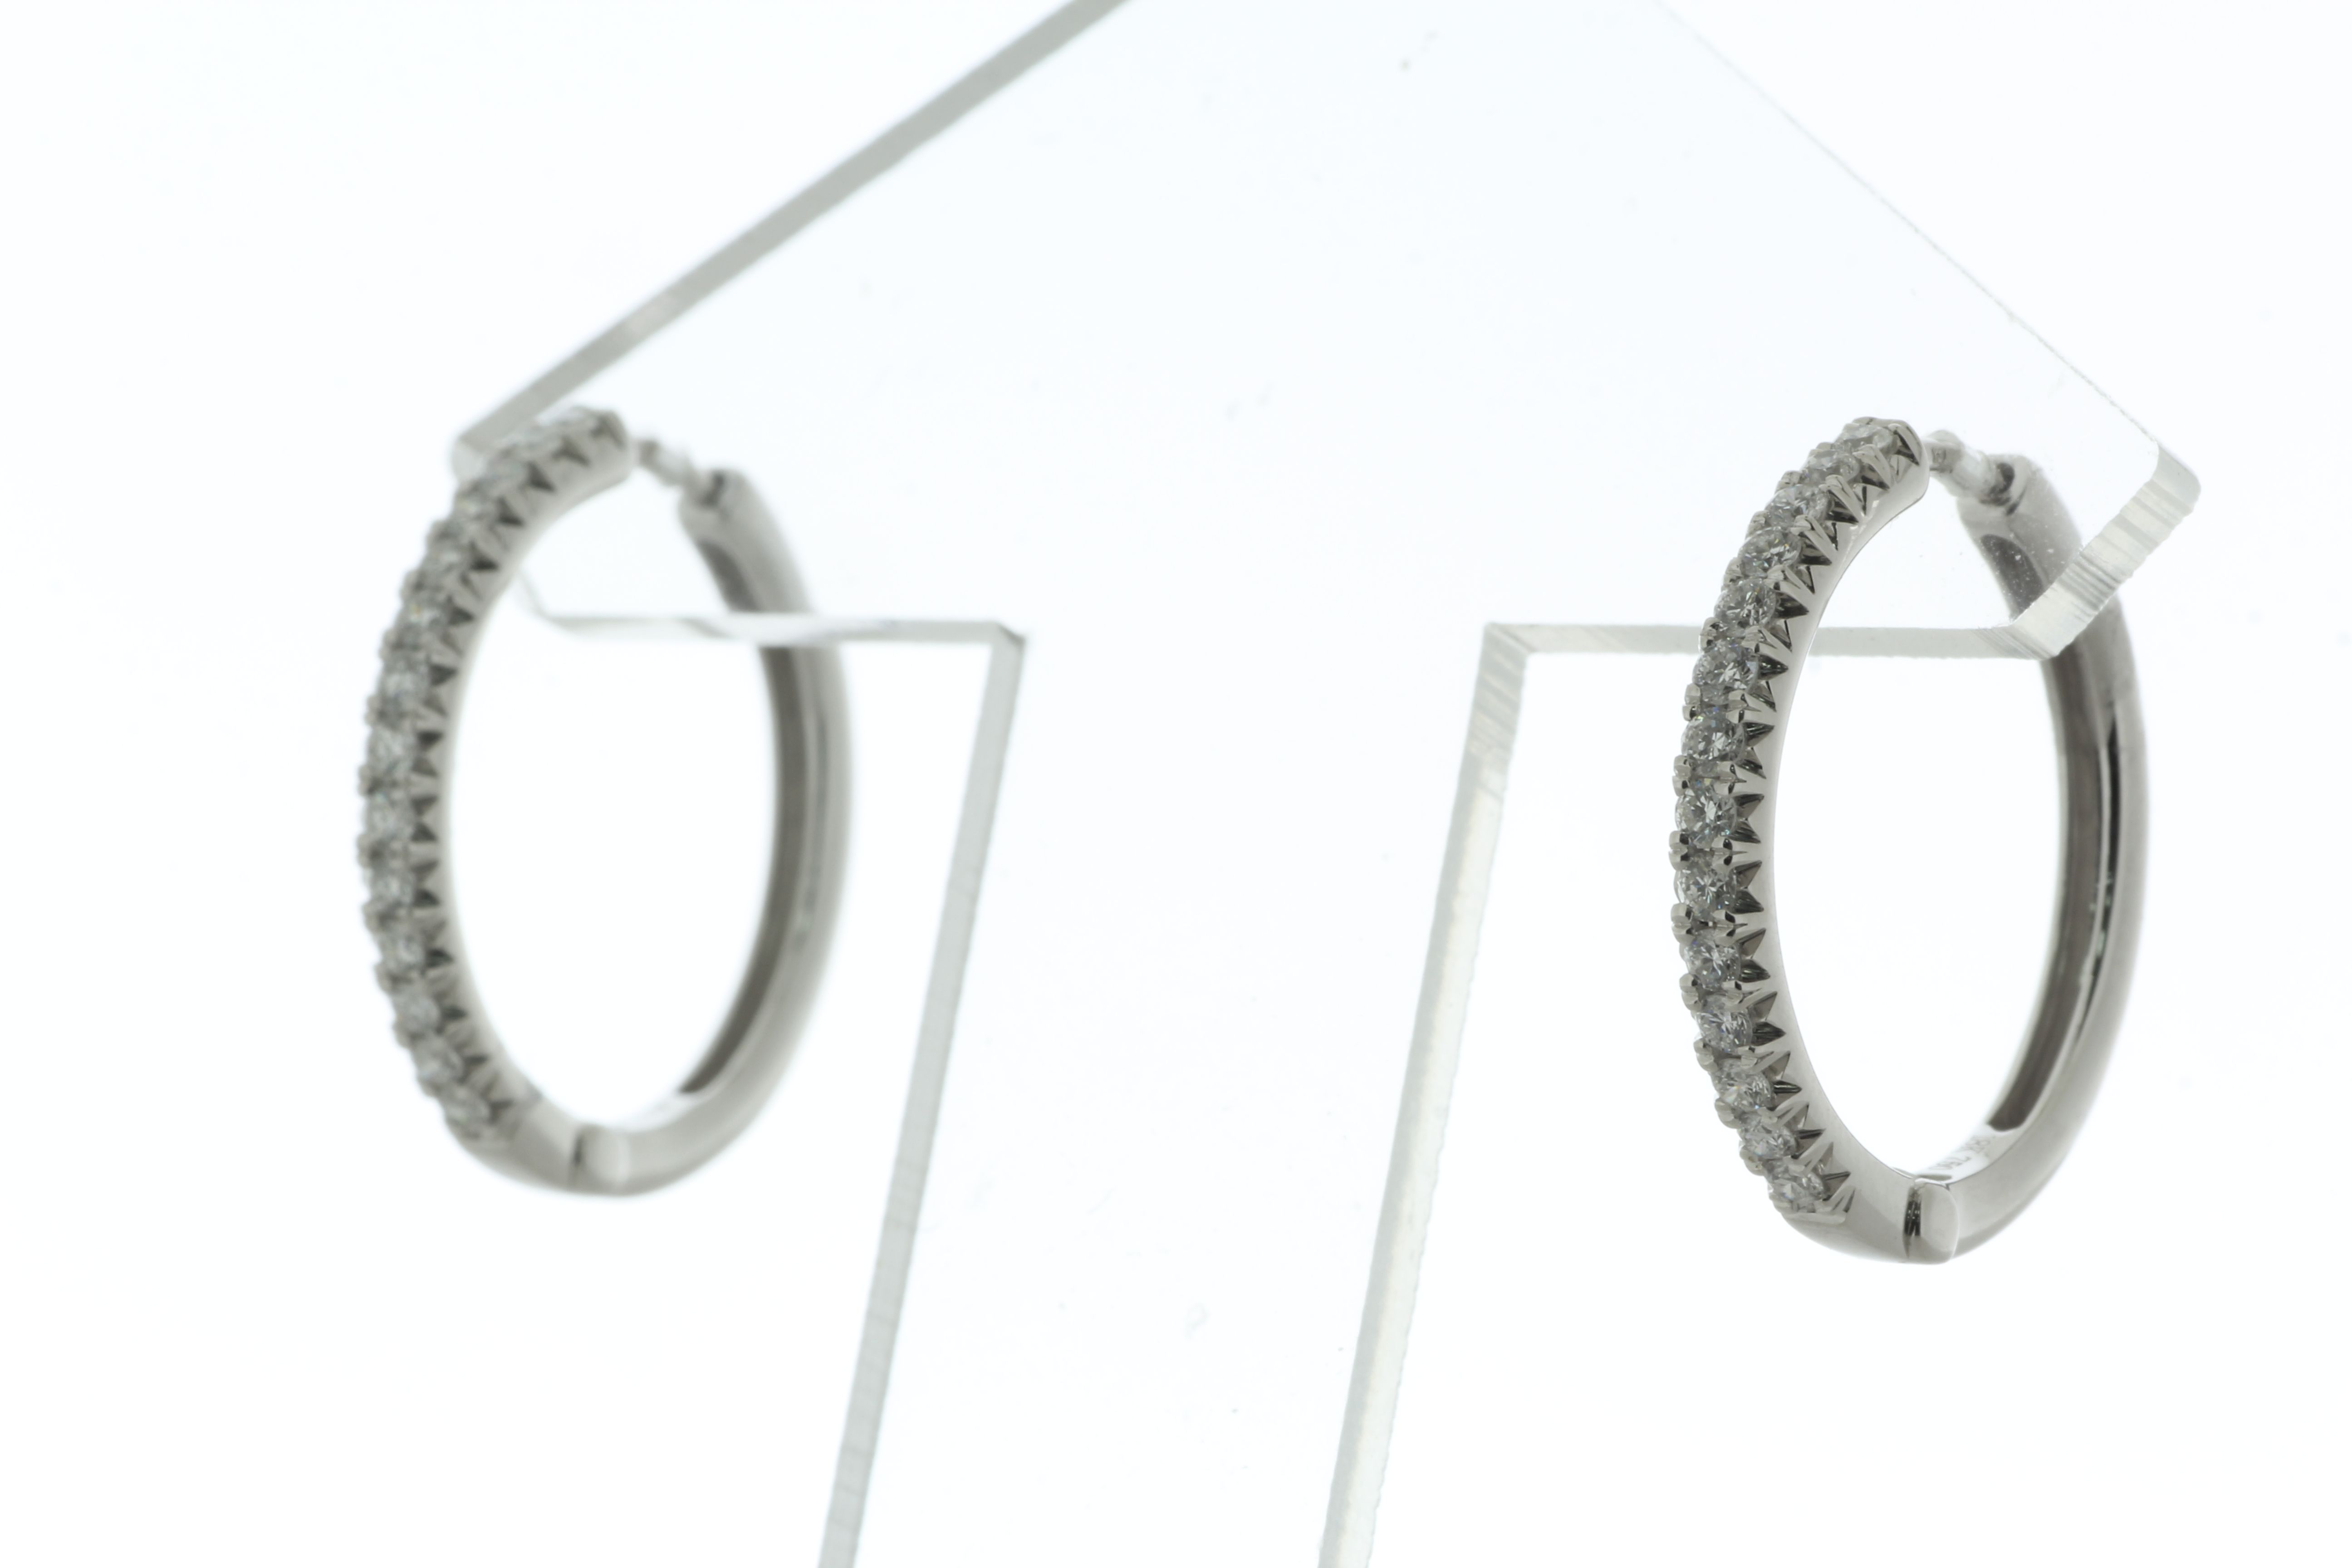 18ct White Gold Claw Set Hoop Diamond Earring 0.52 Carats - Image 2 of 5